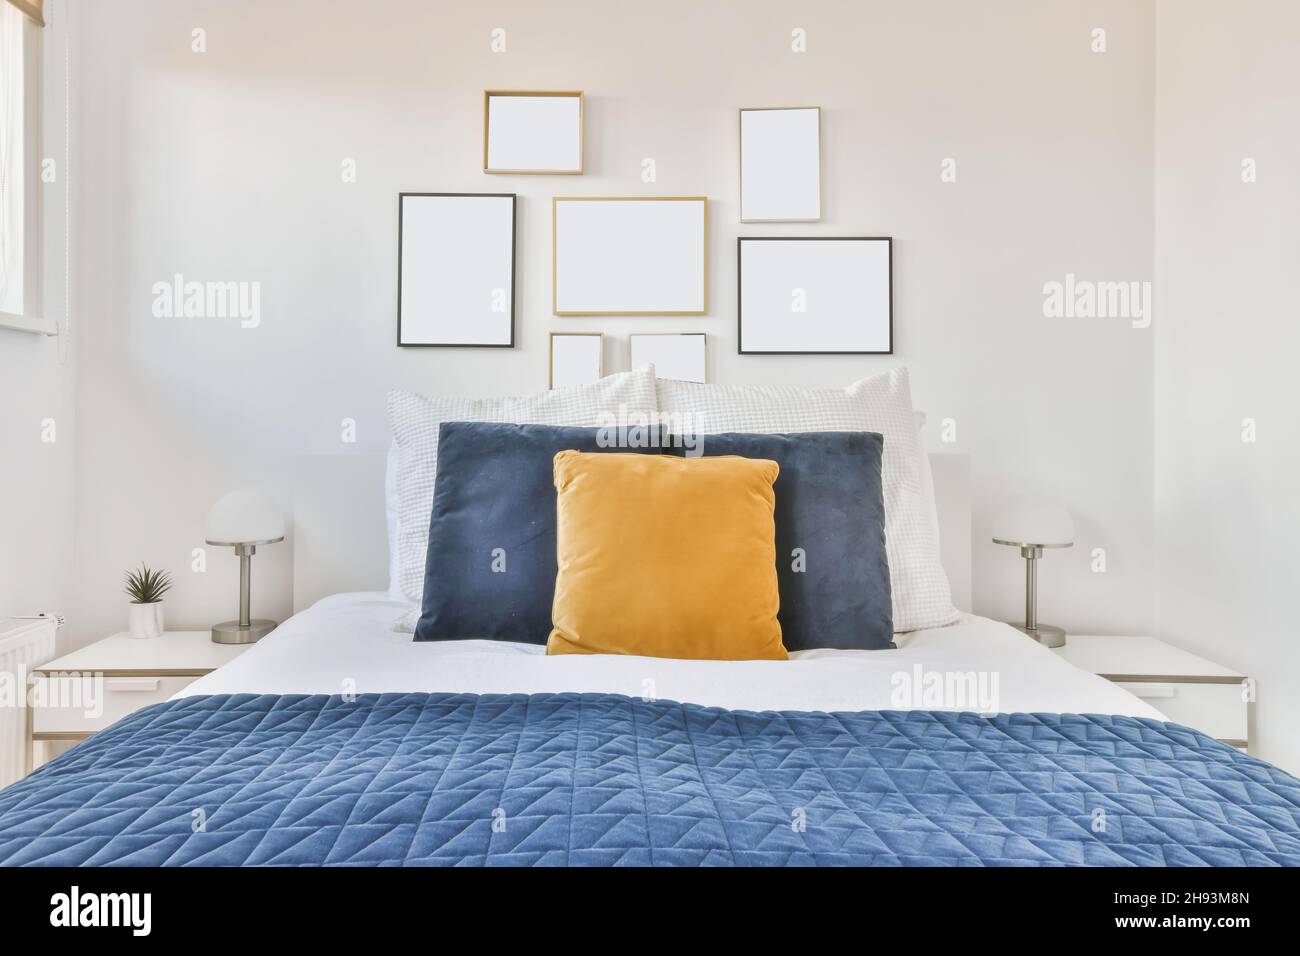 Luxurious bedroom with soft bed and blue bedspread Stock Photo